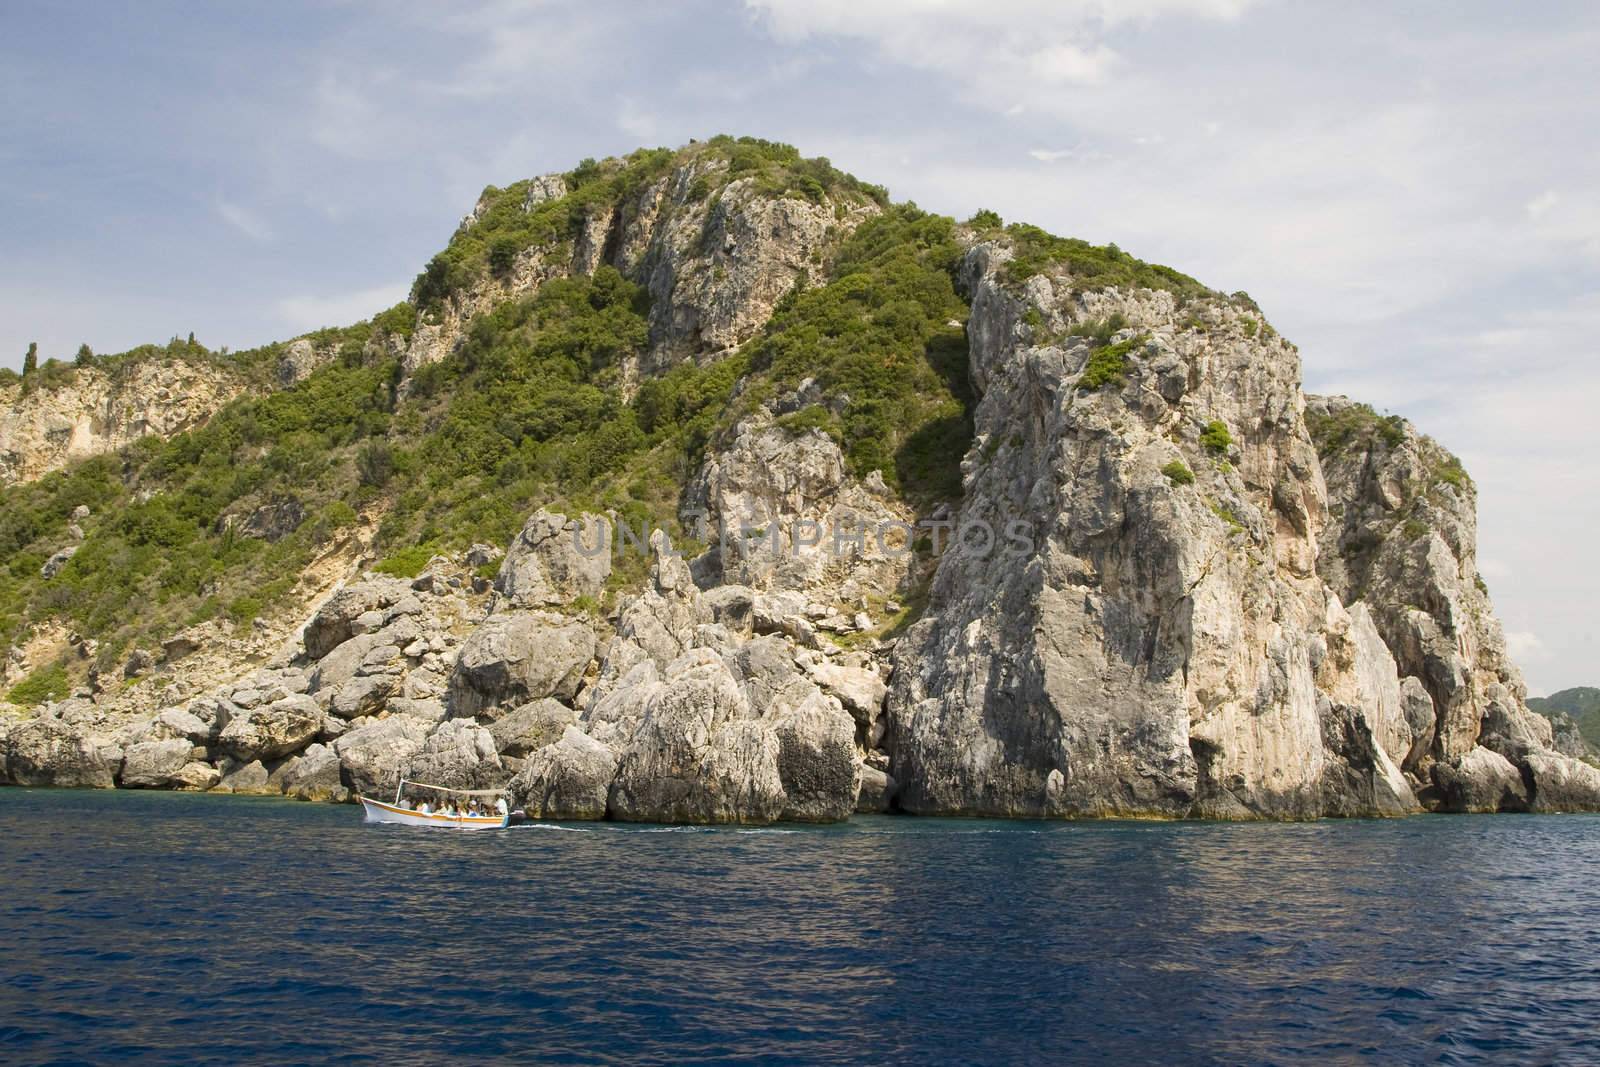 Corfu Island - View from the boat